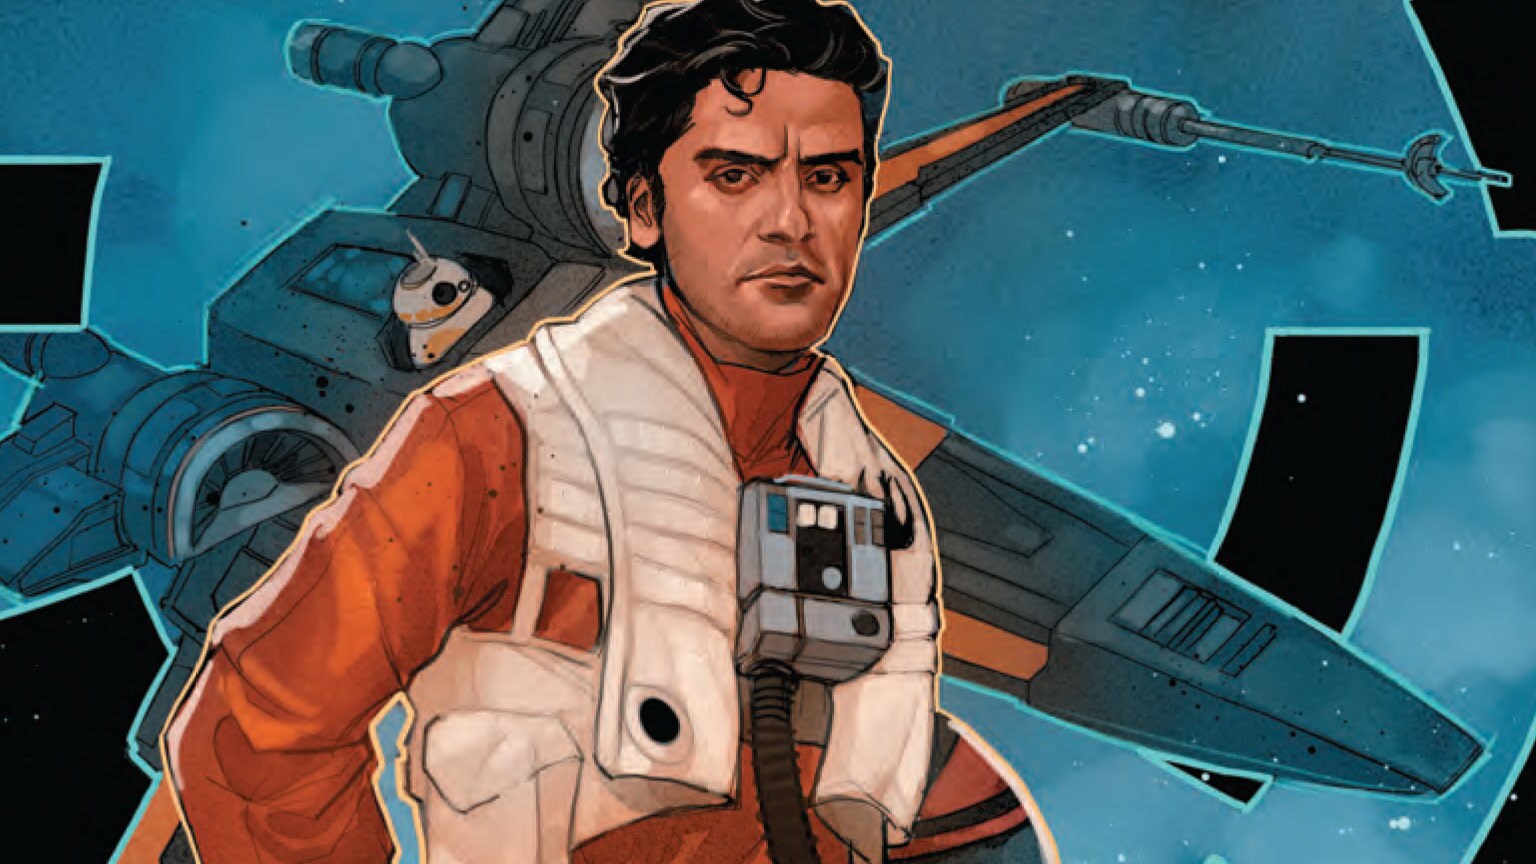 Marvel's Age of Resistance Reveals the Early Days of Poe Dameron and General Hux - Exclusive